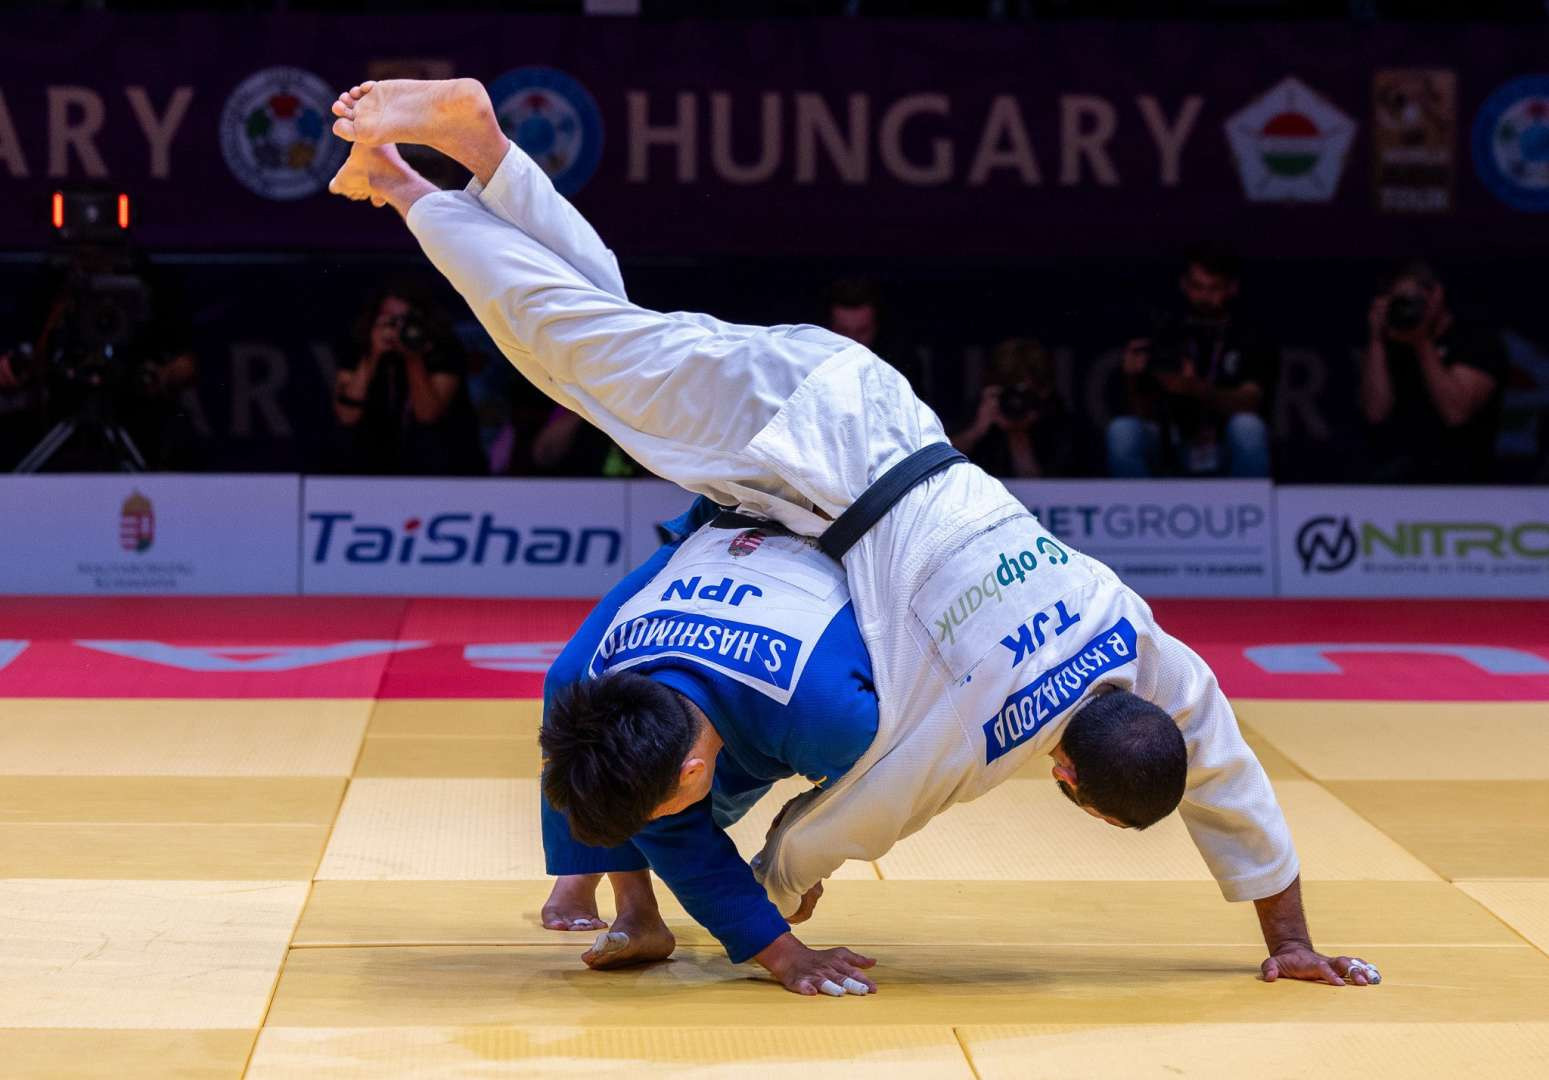 Hashimoto clinches fourth Judo World Masters title in Budapest